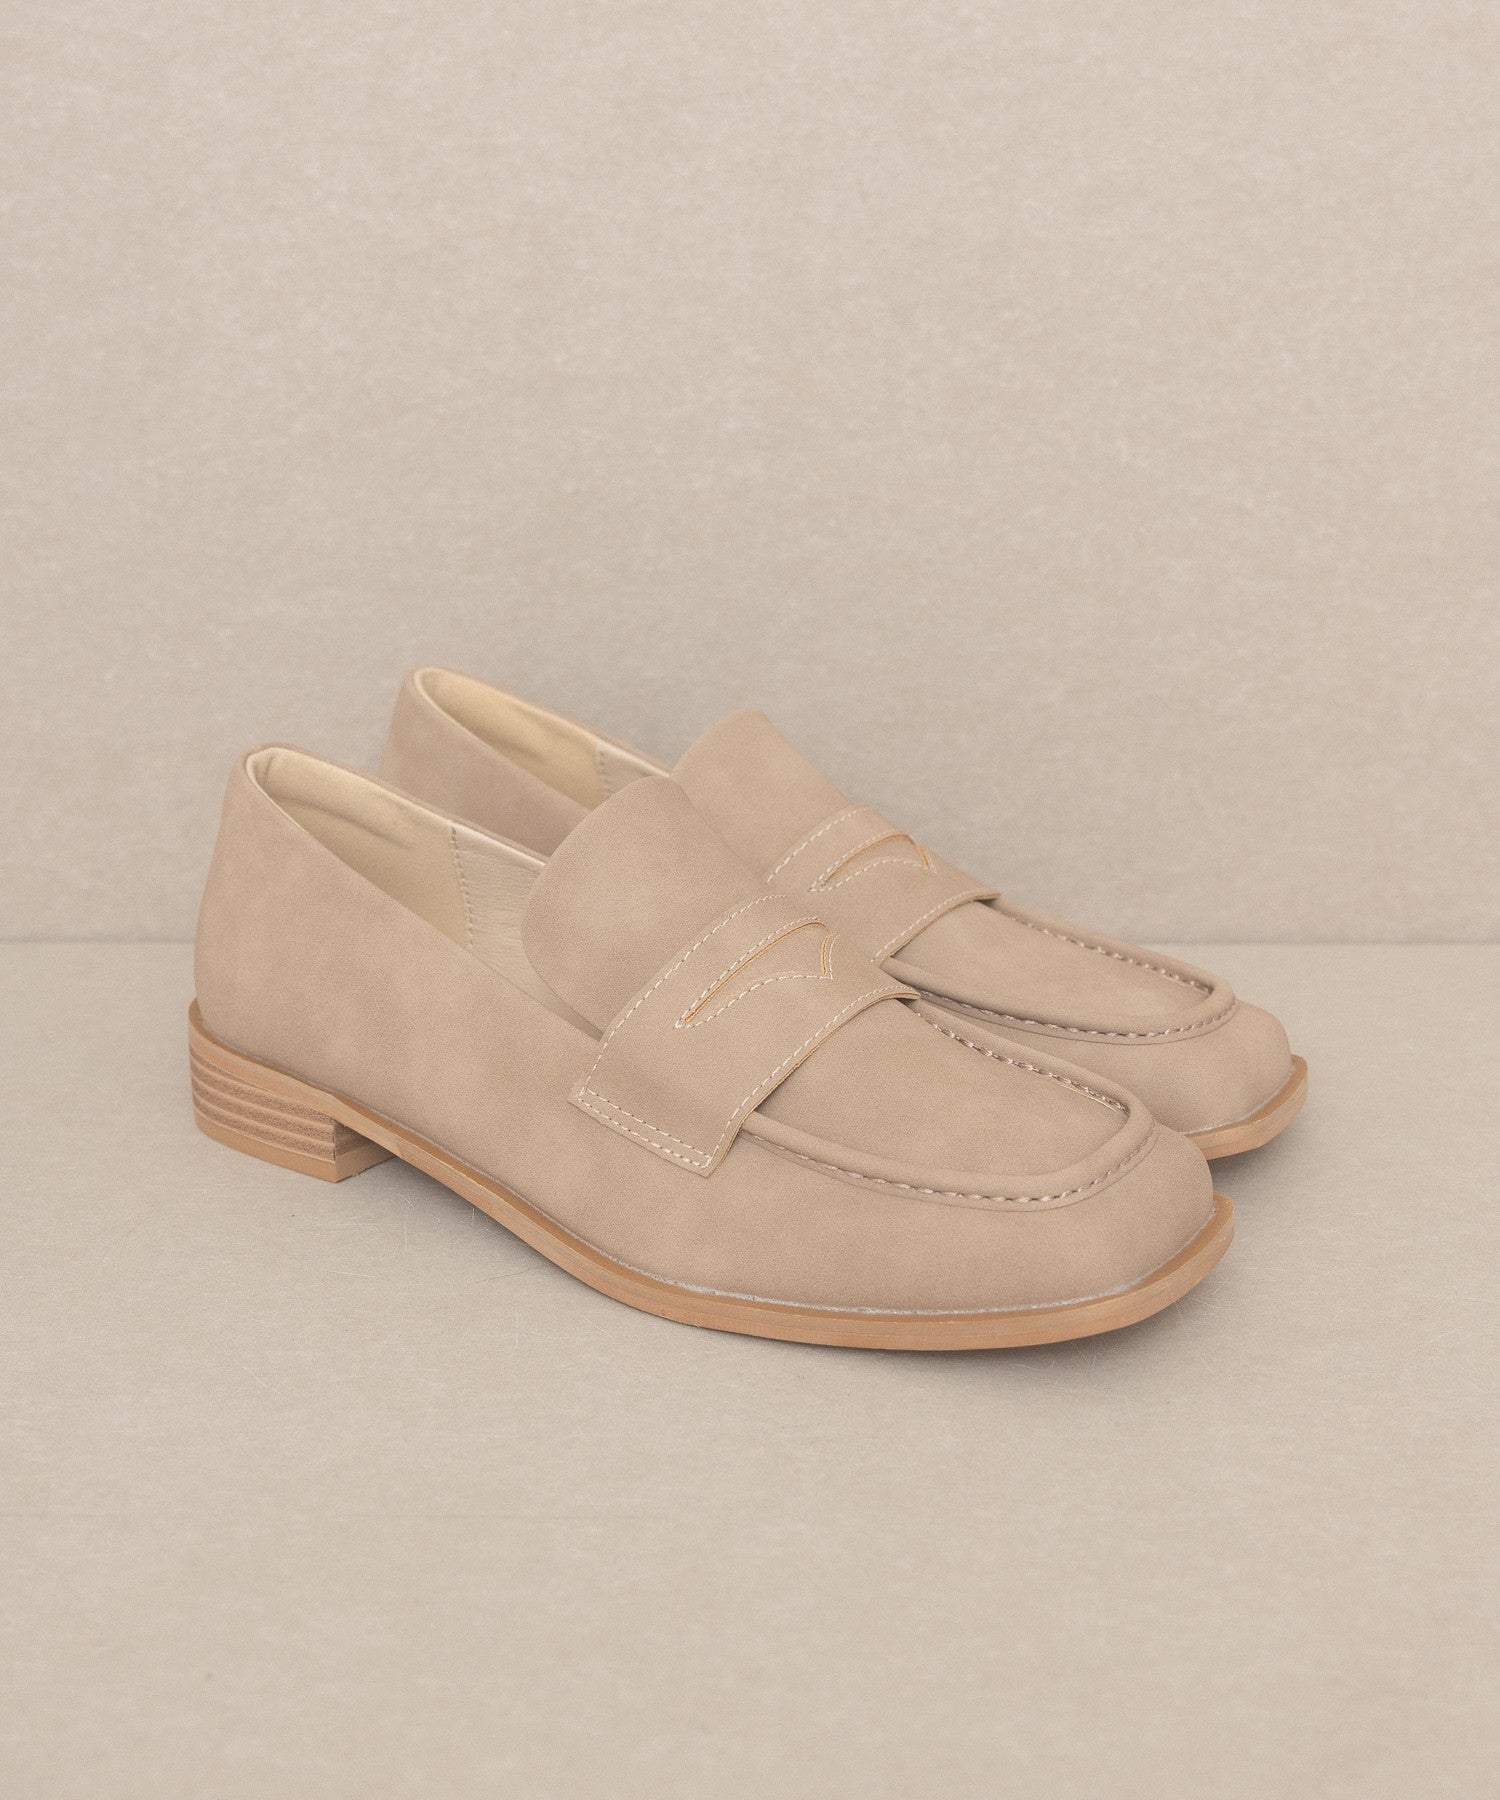 June Loafers